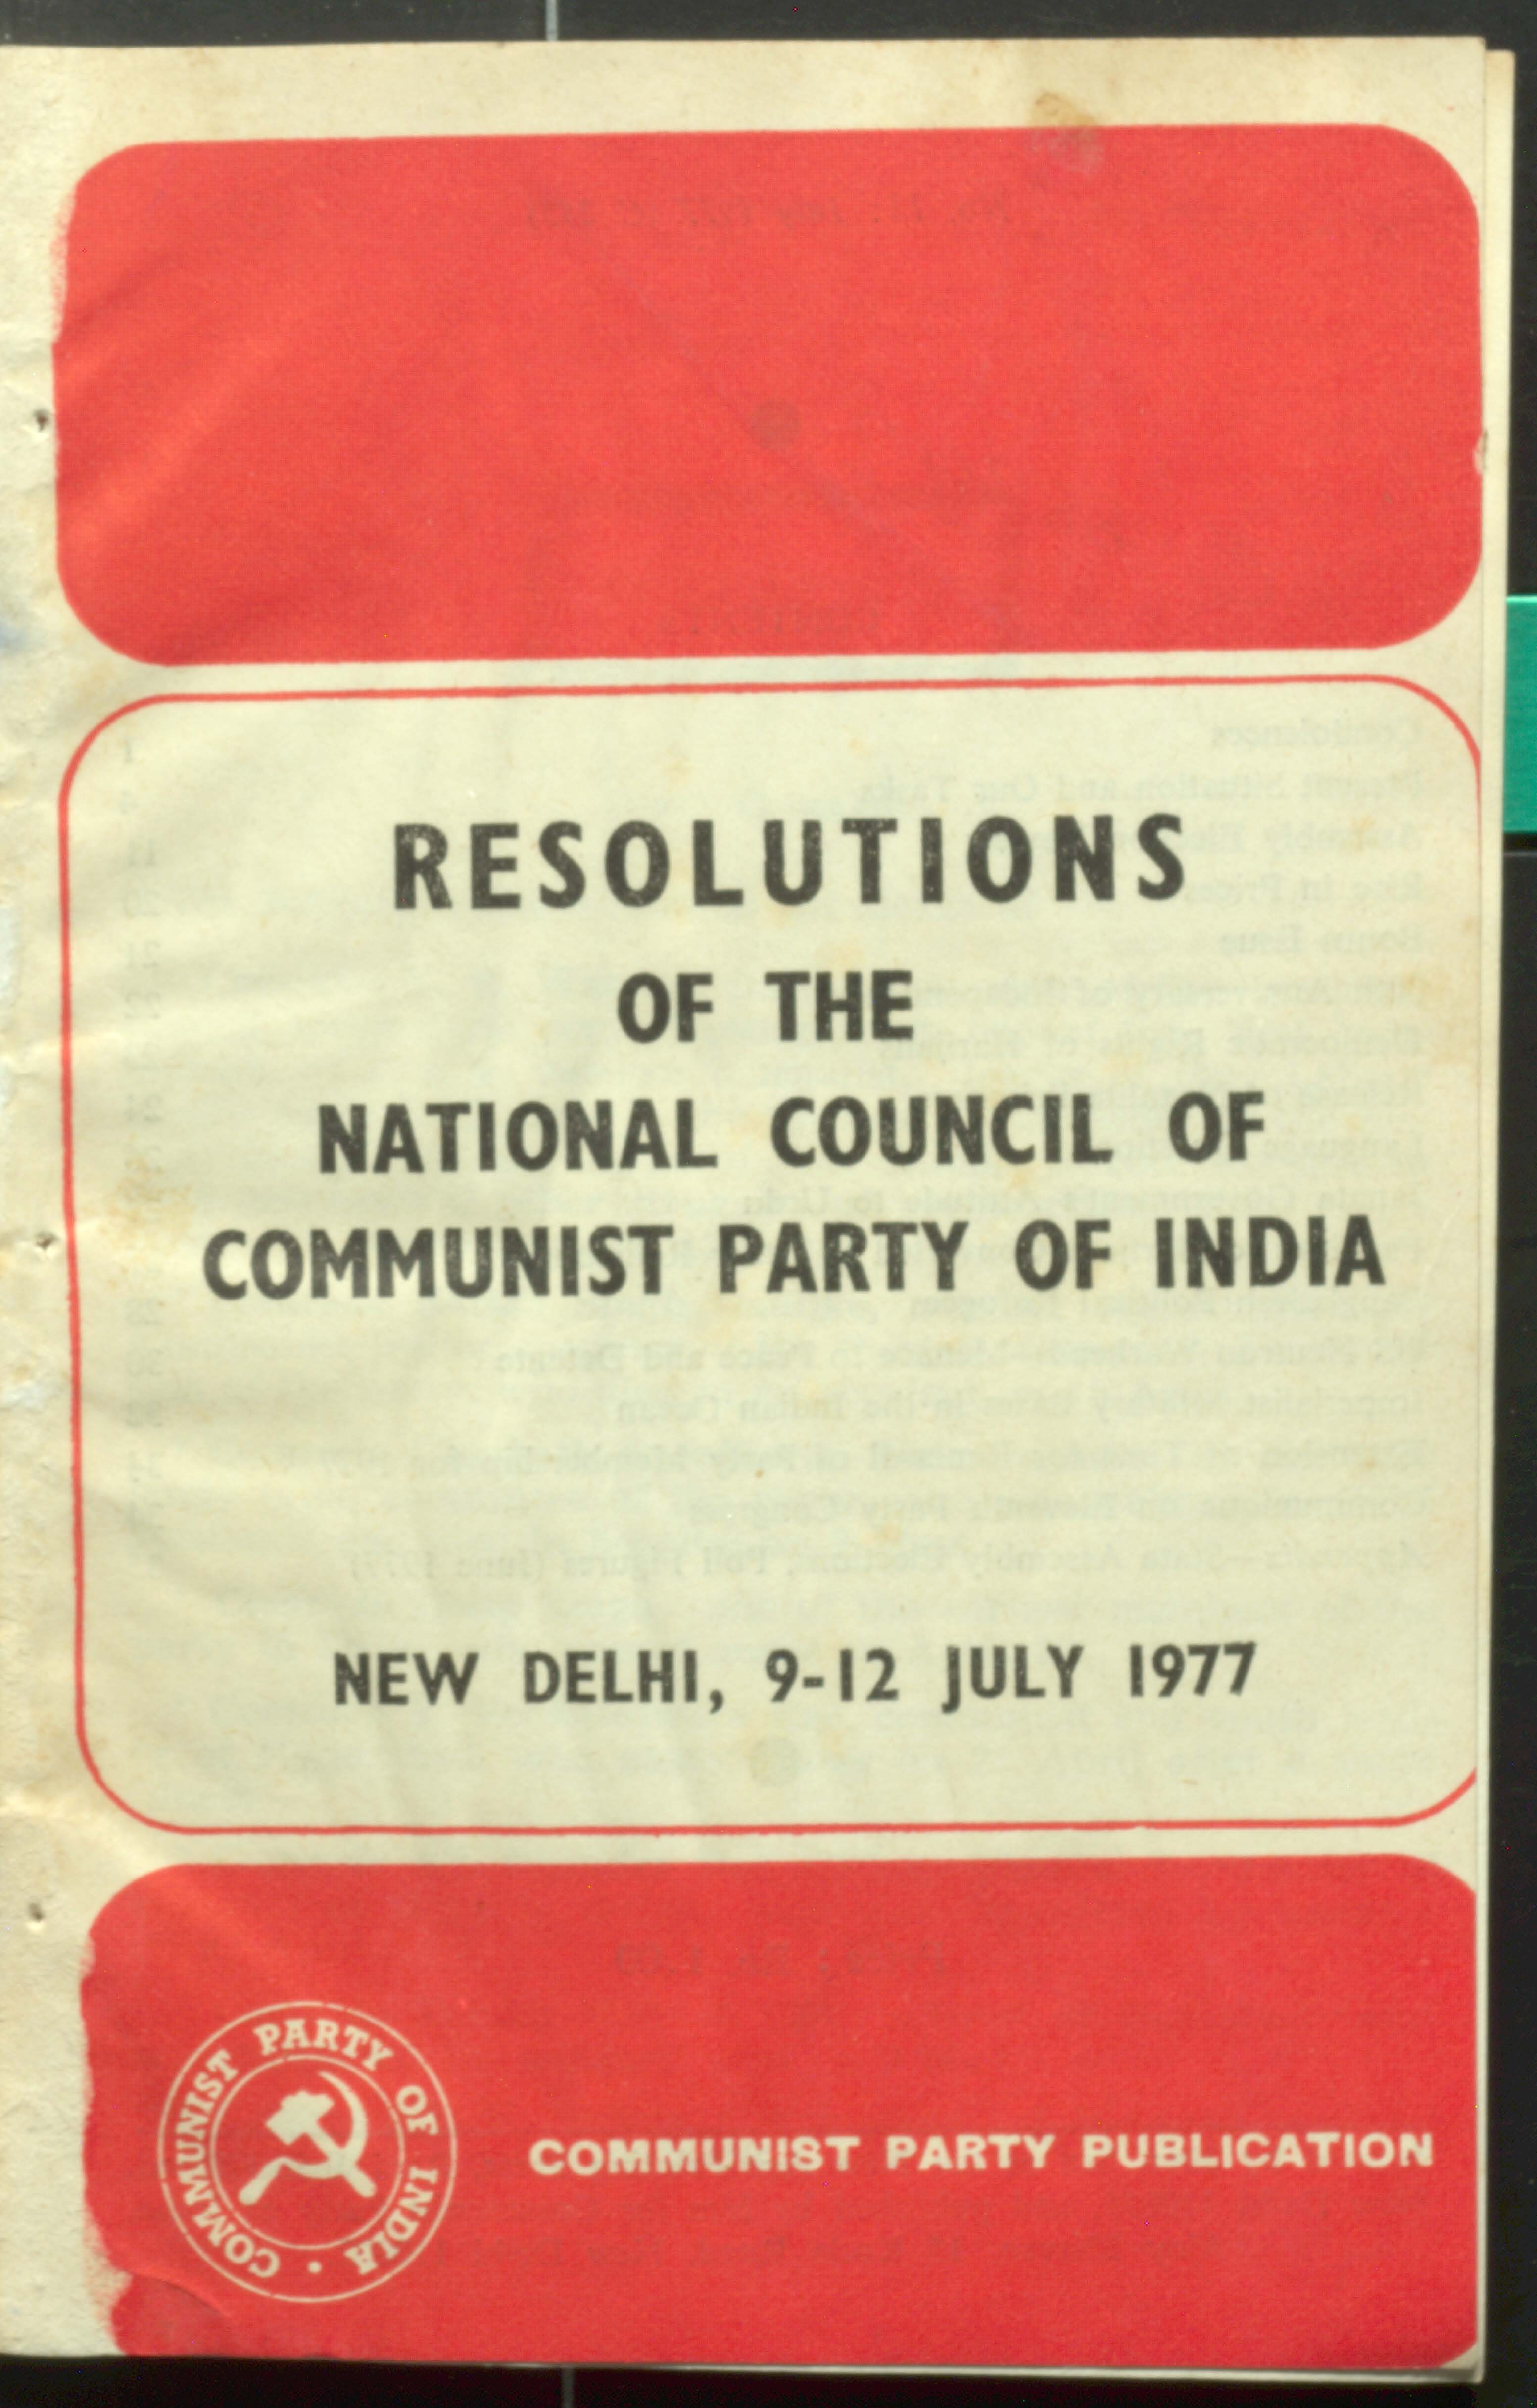 Resoiutions Of The National Council Of CPI (9-12, July 1977)